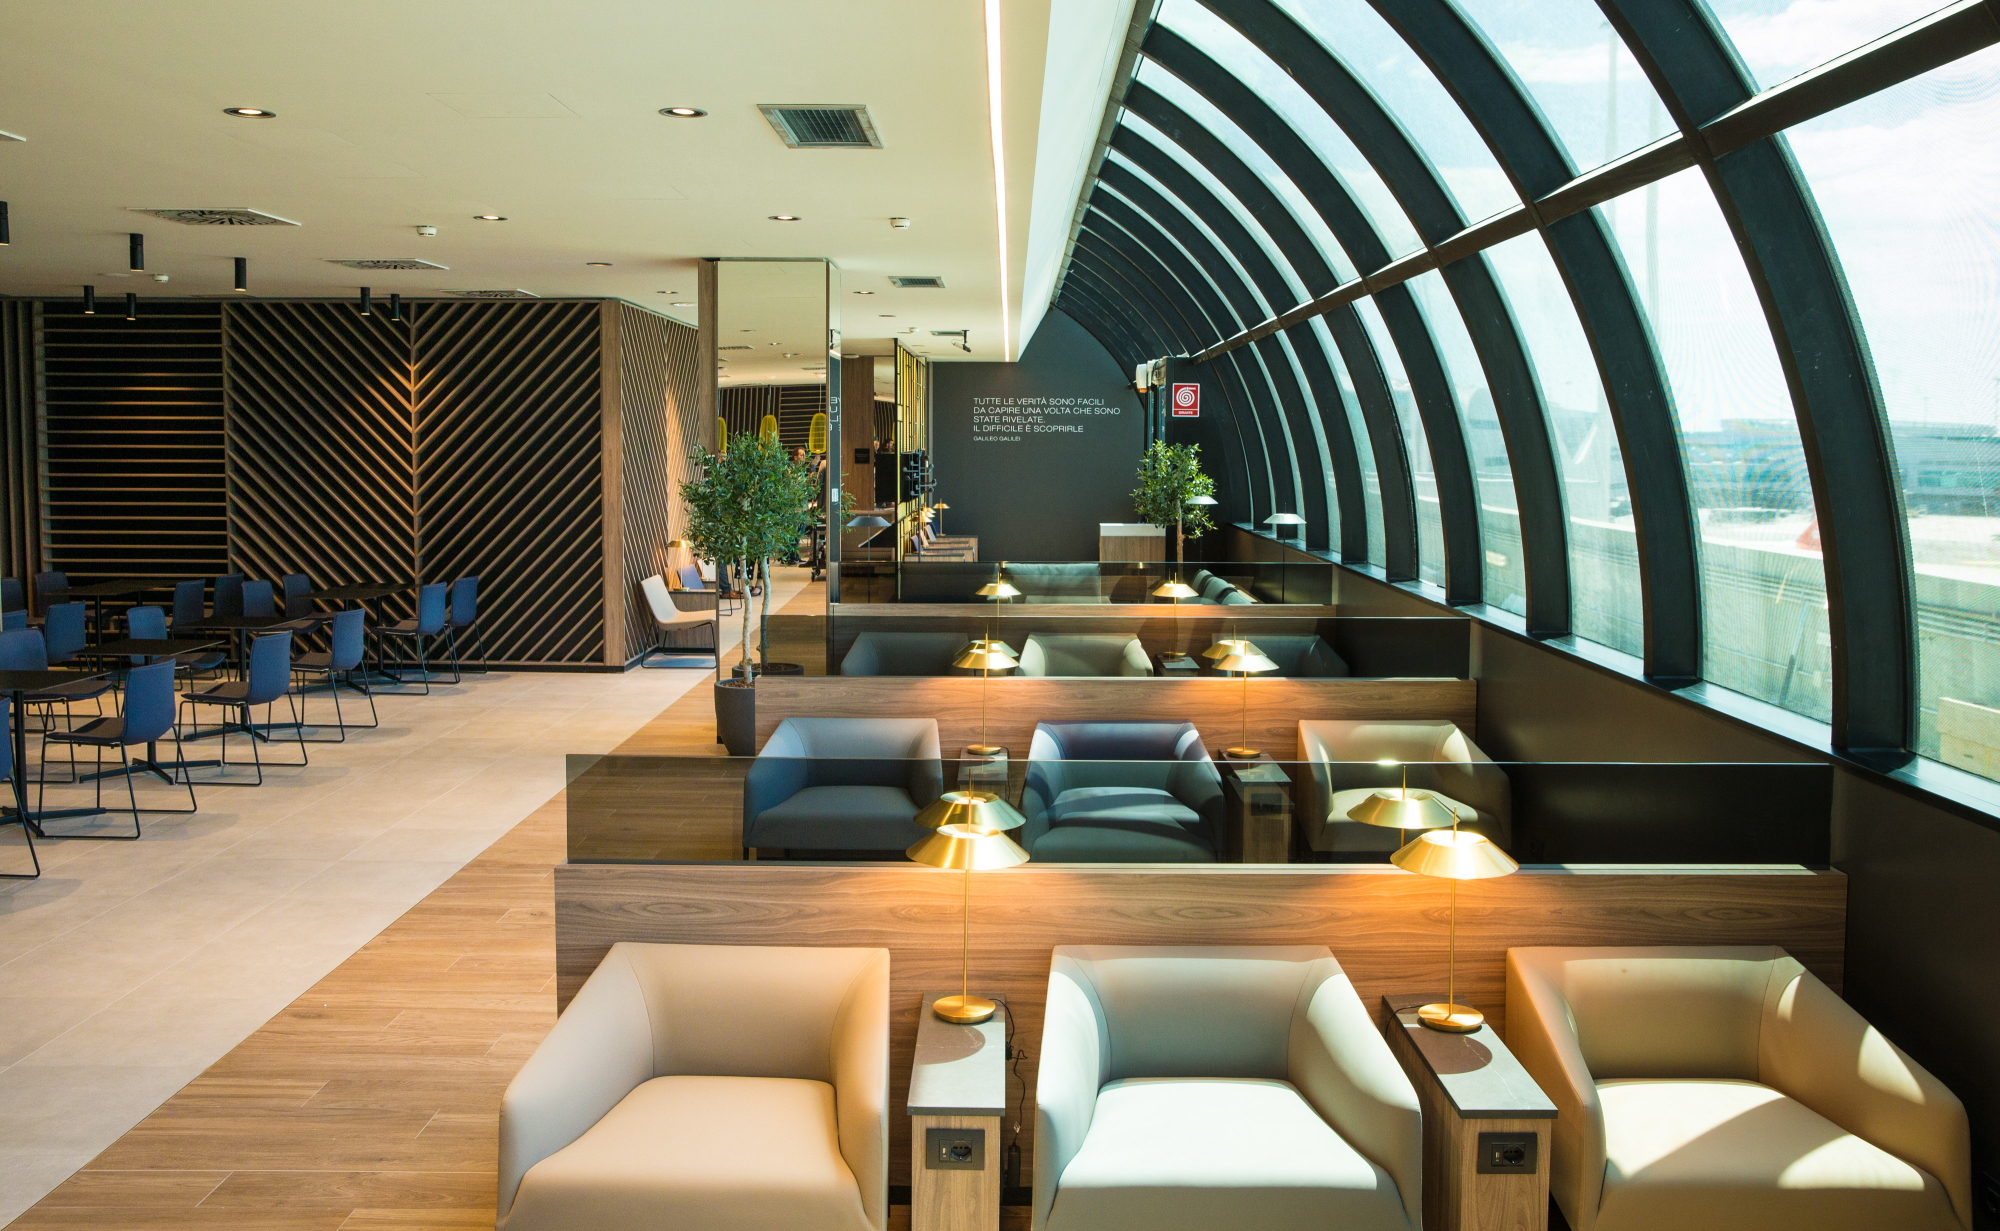 Star Alliance has opened a lounge for eligible First and Business Class passengers and Star Alliance Gold Card holders at Fiumicino Airport in Rome, Italy. Click to enlarge.